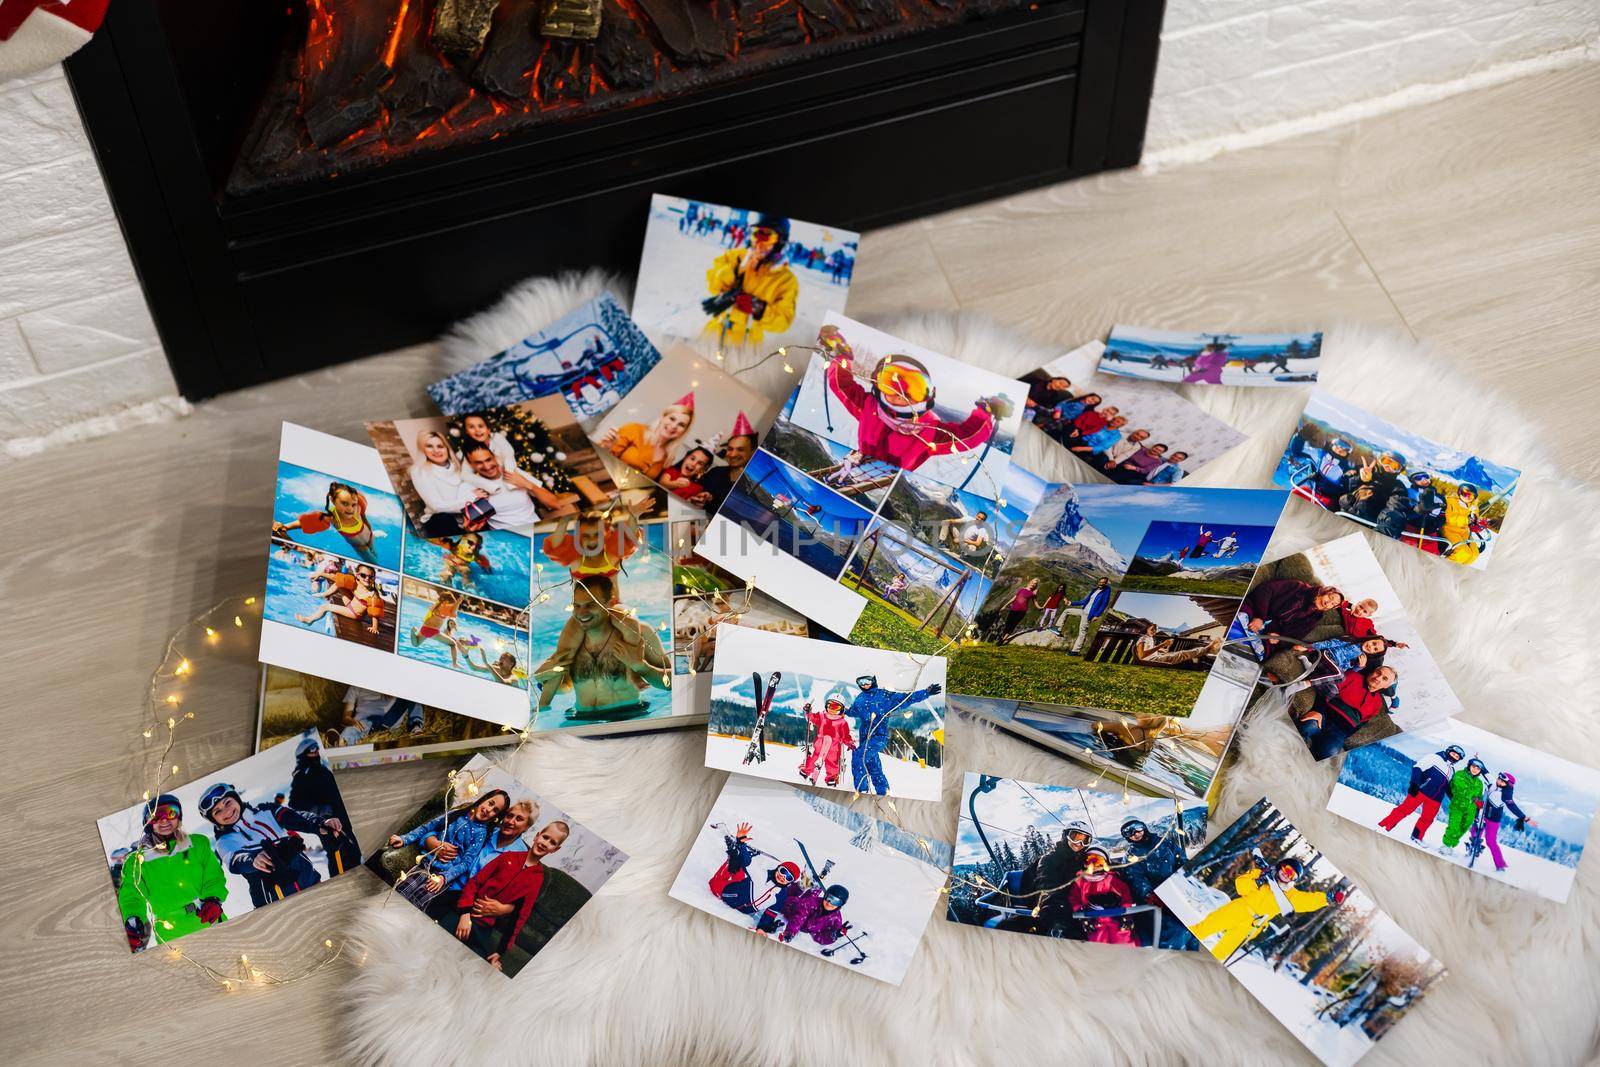 photo books lie near the fireplace at christmas